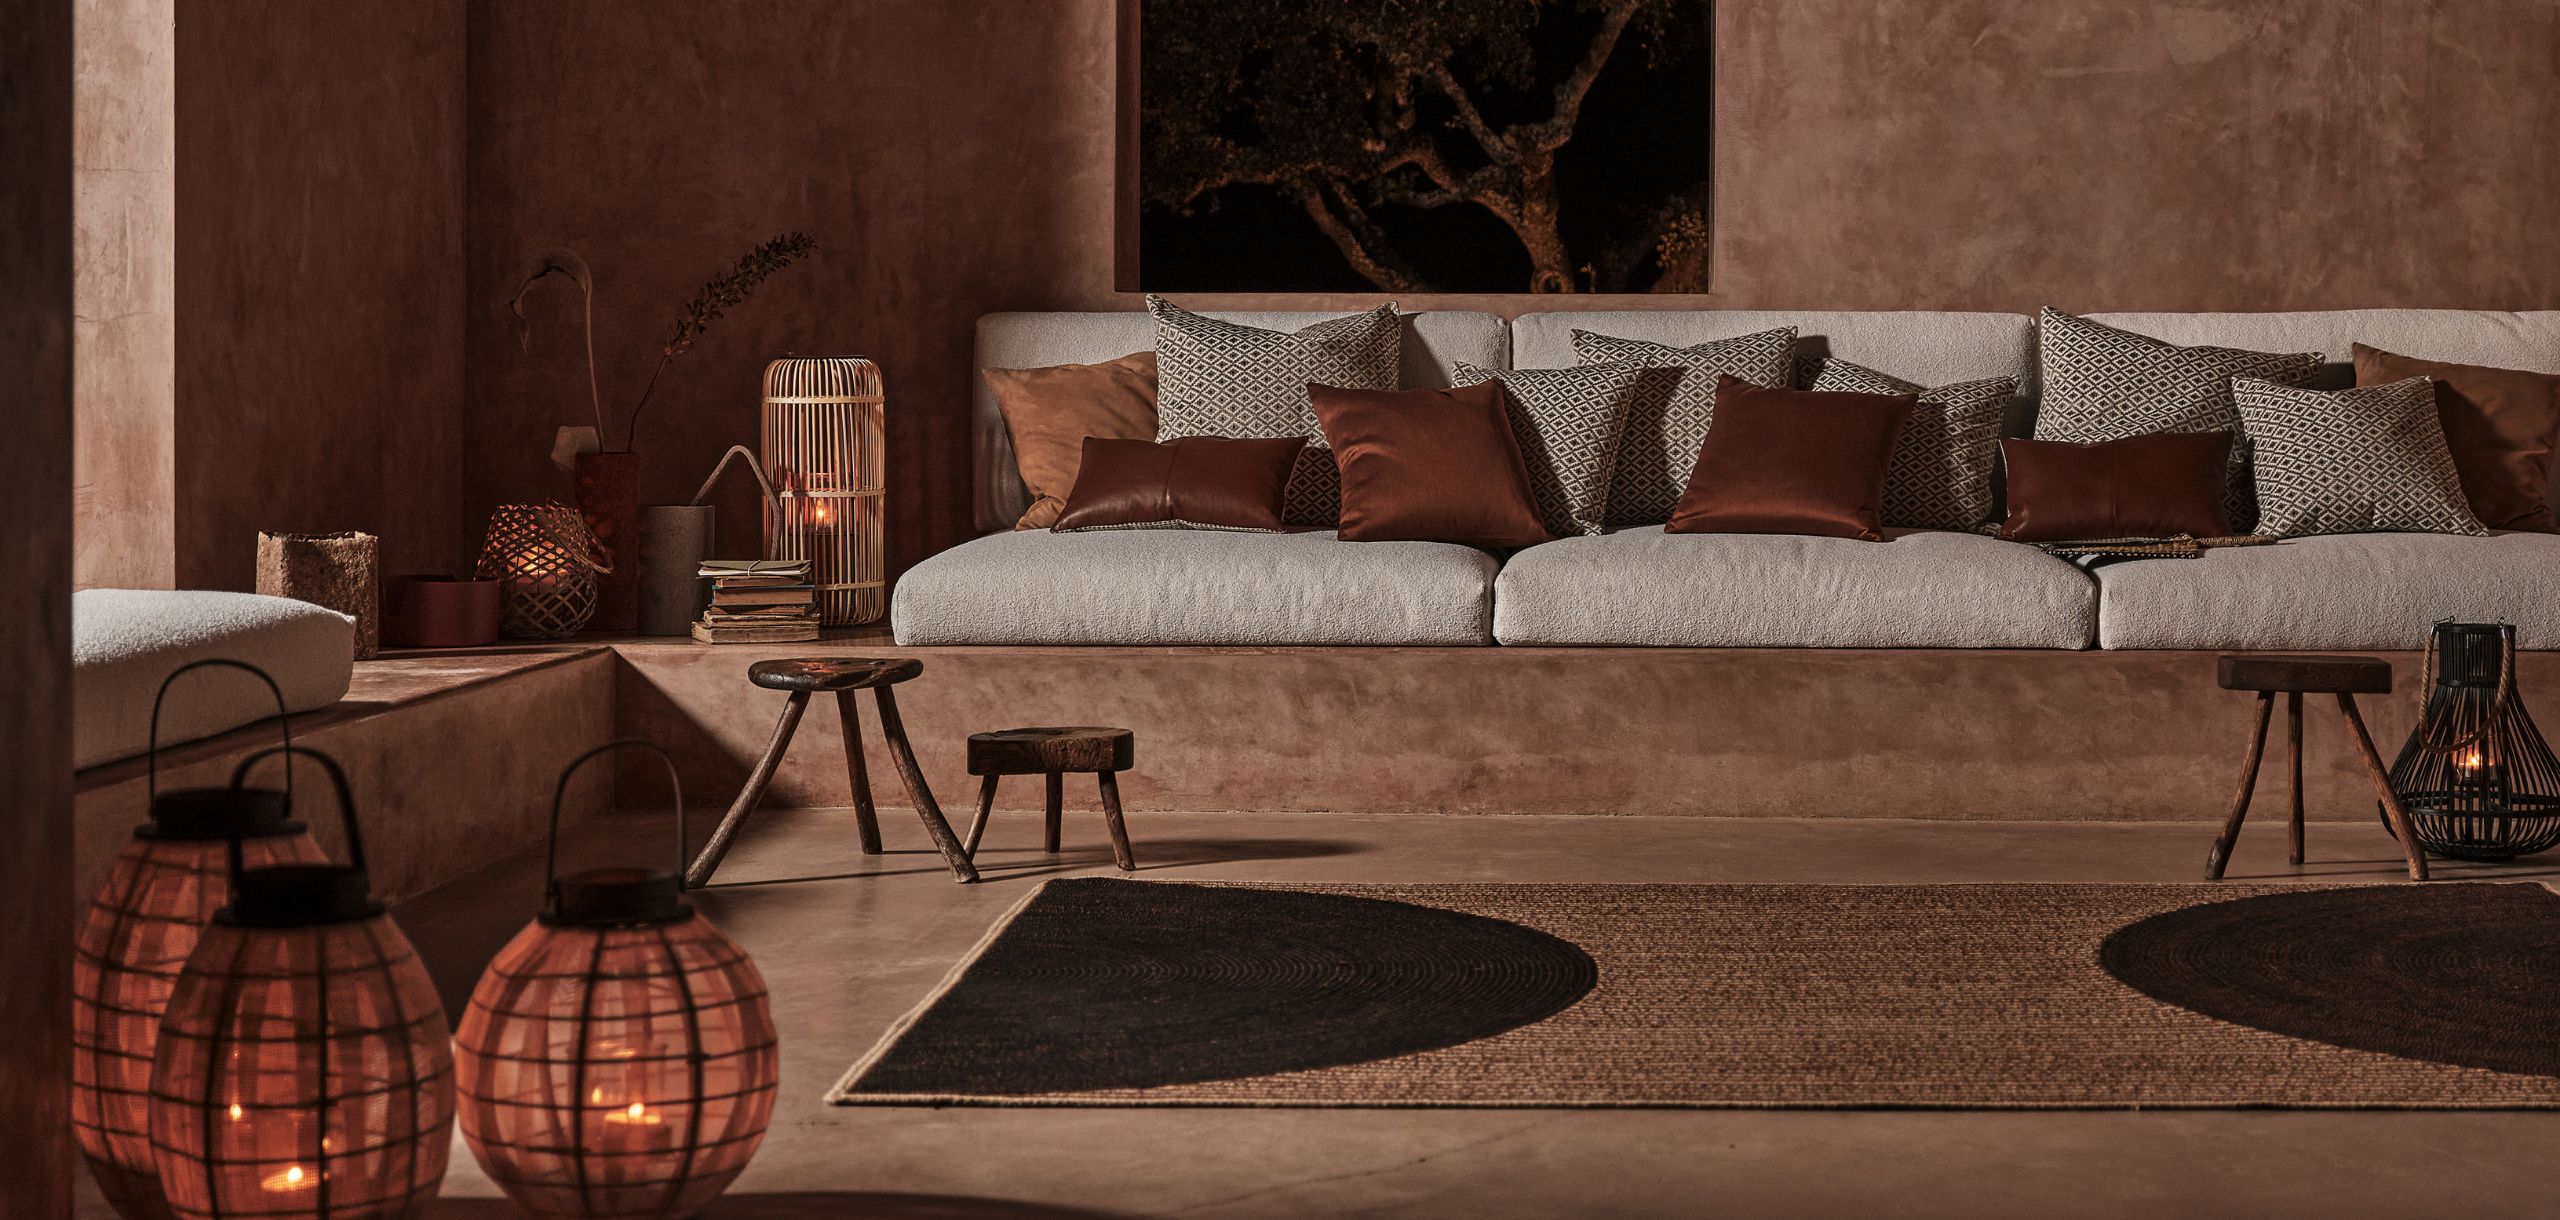 A moody living room styled by Frette’s Luxury Earth, Domino collection